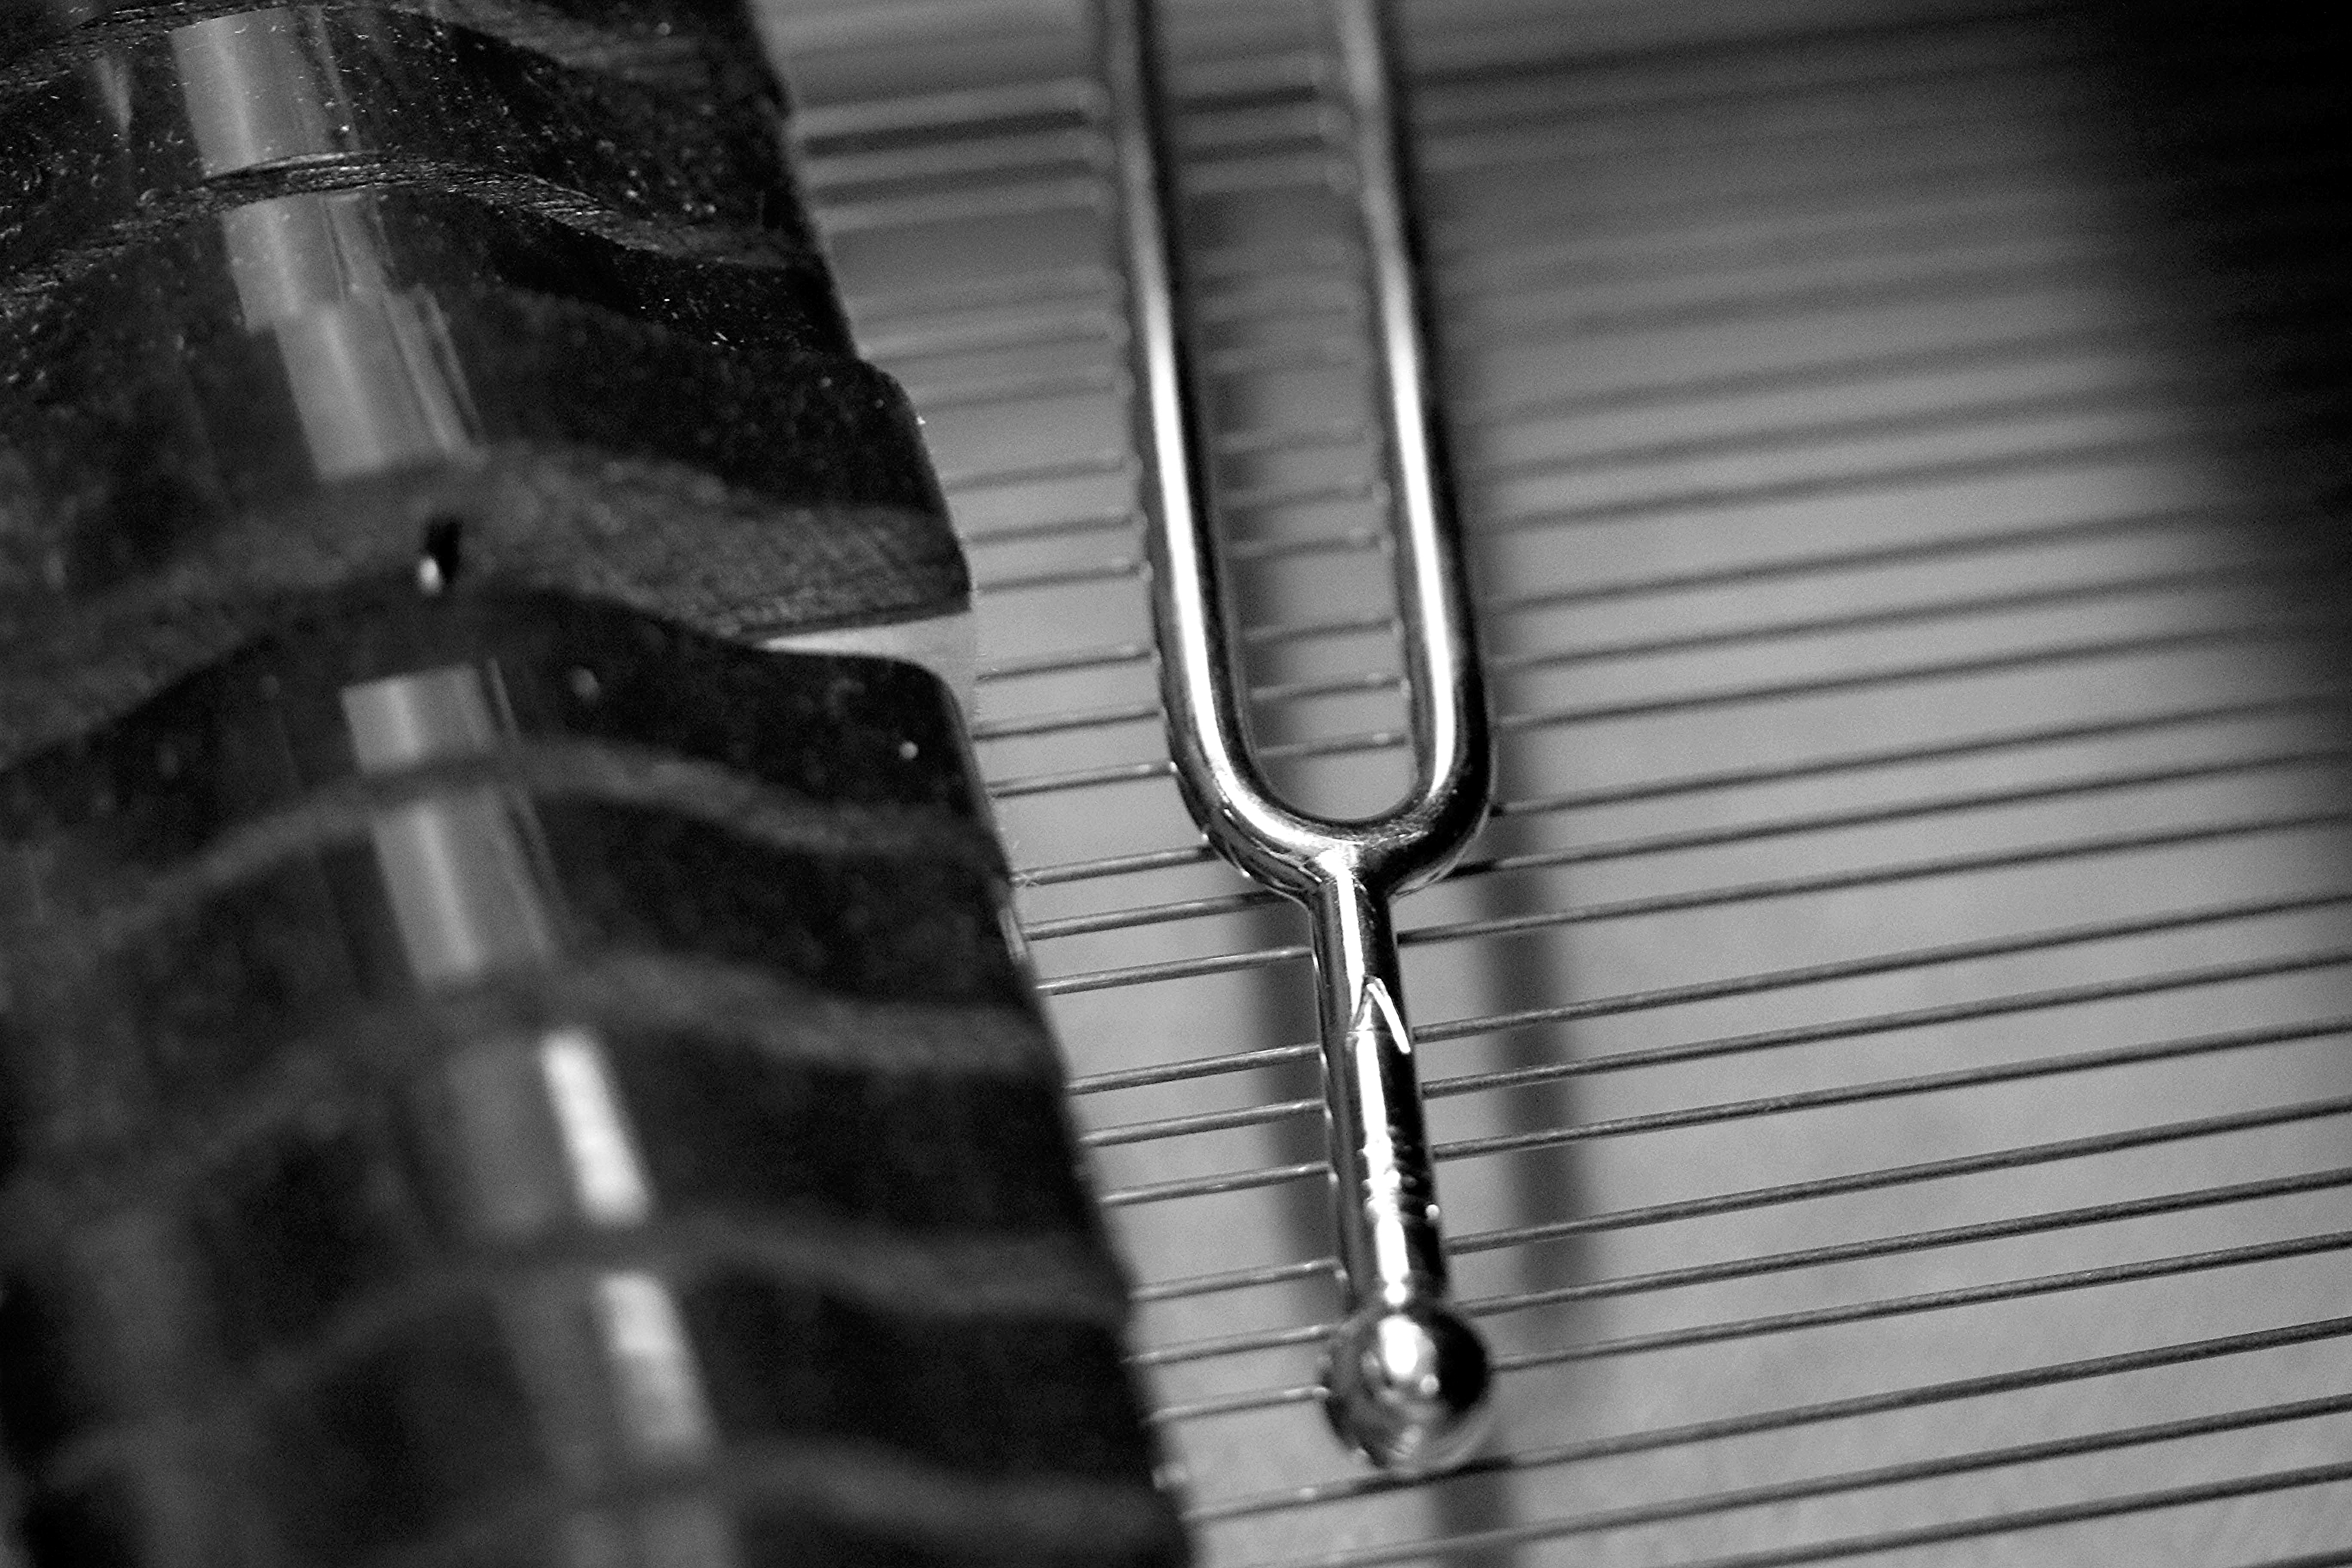 A silver tuning fork rests on the interior wires of a piano.